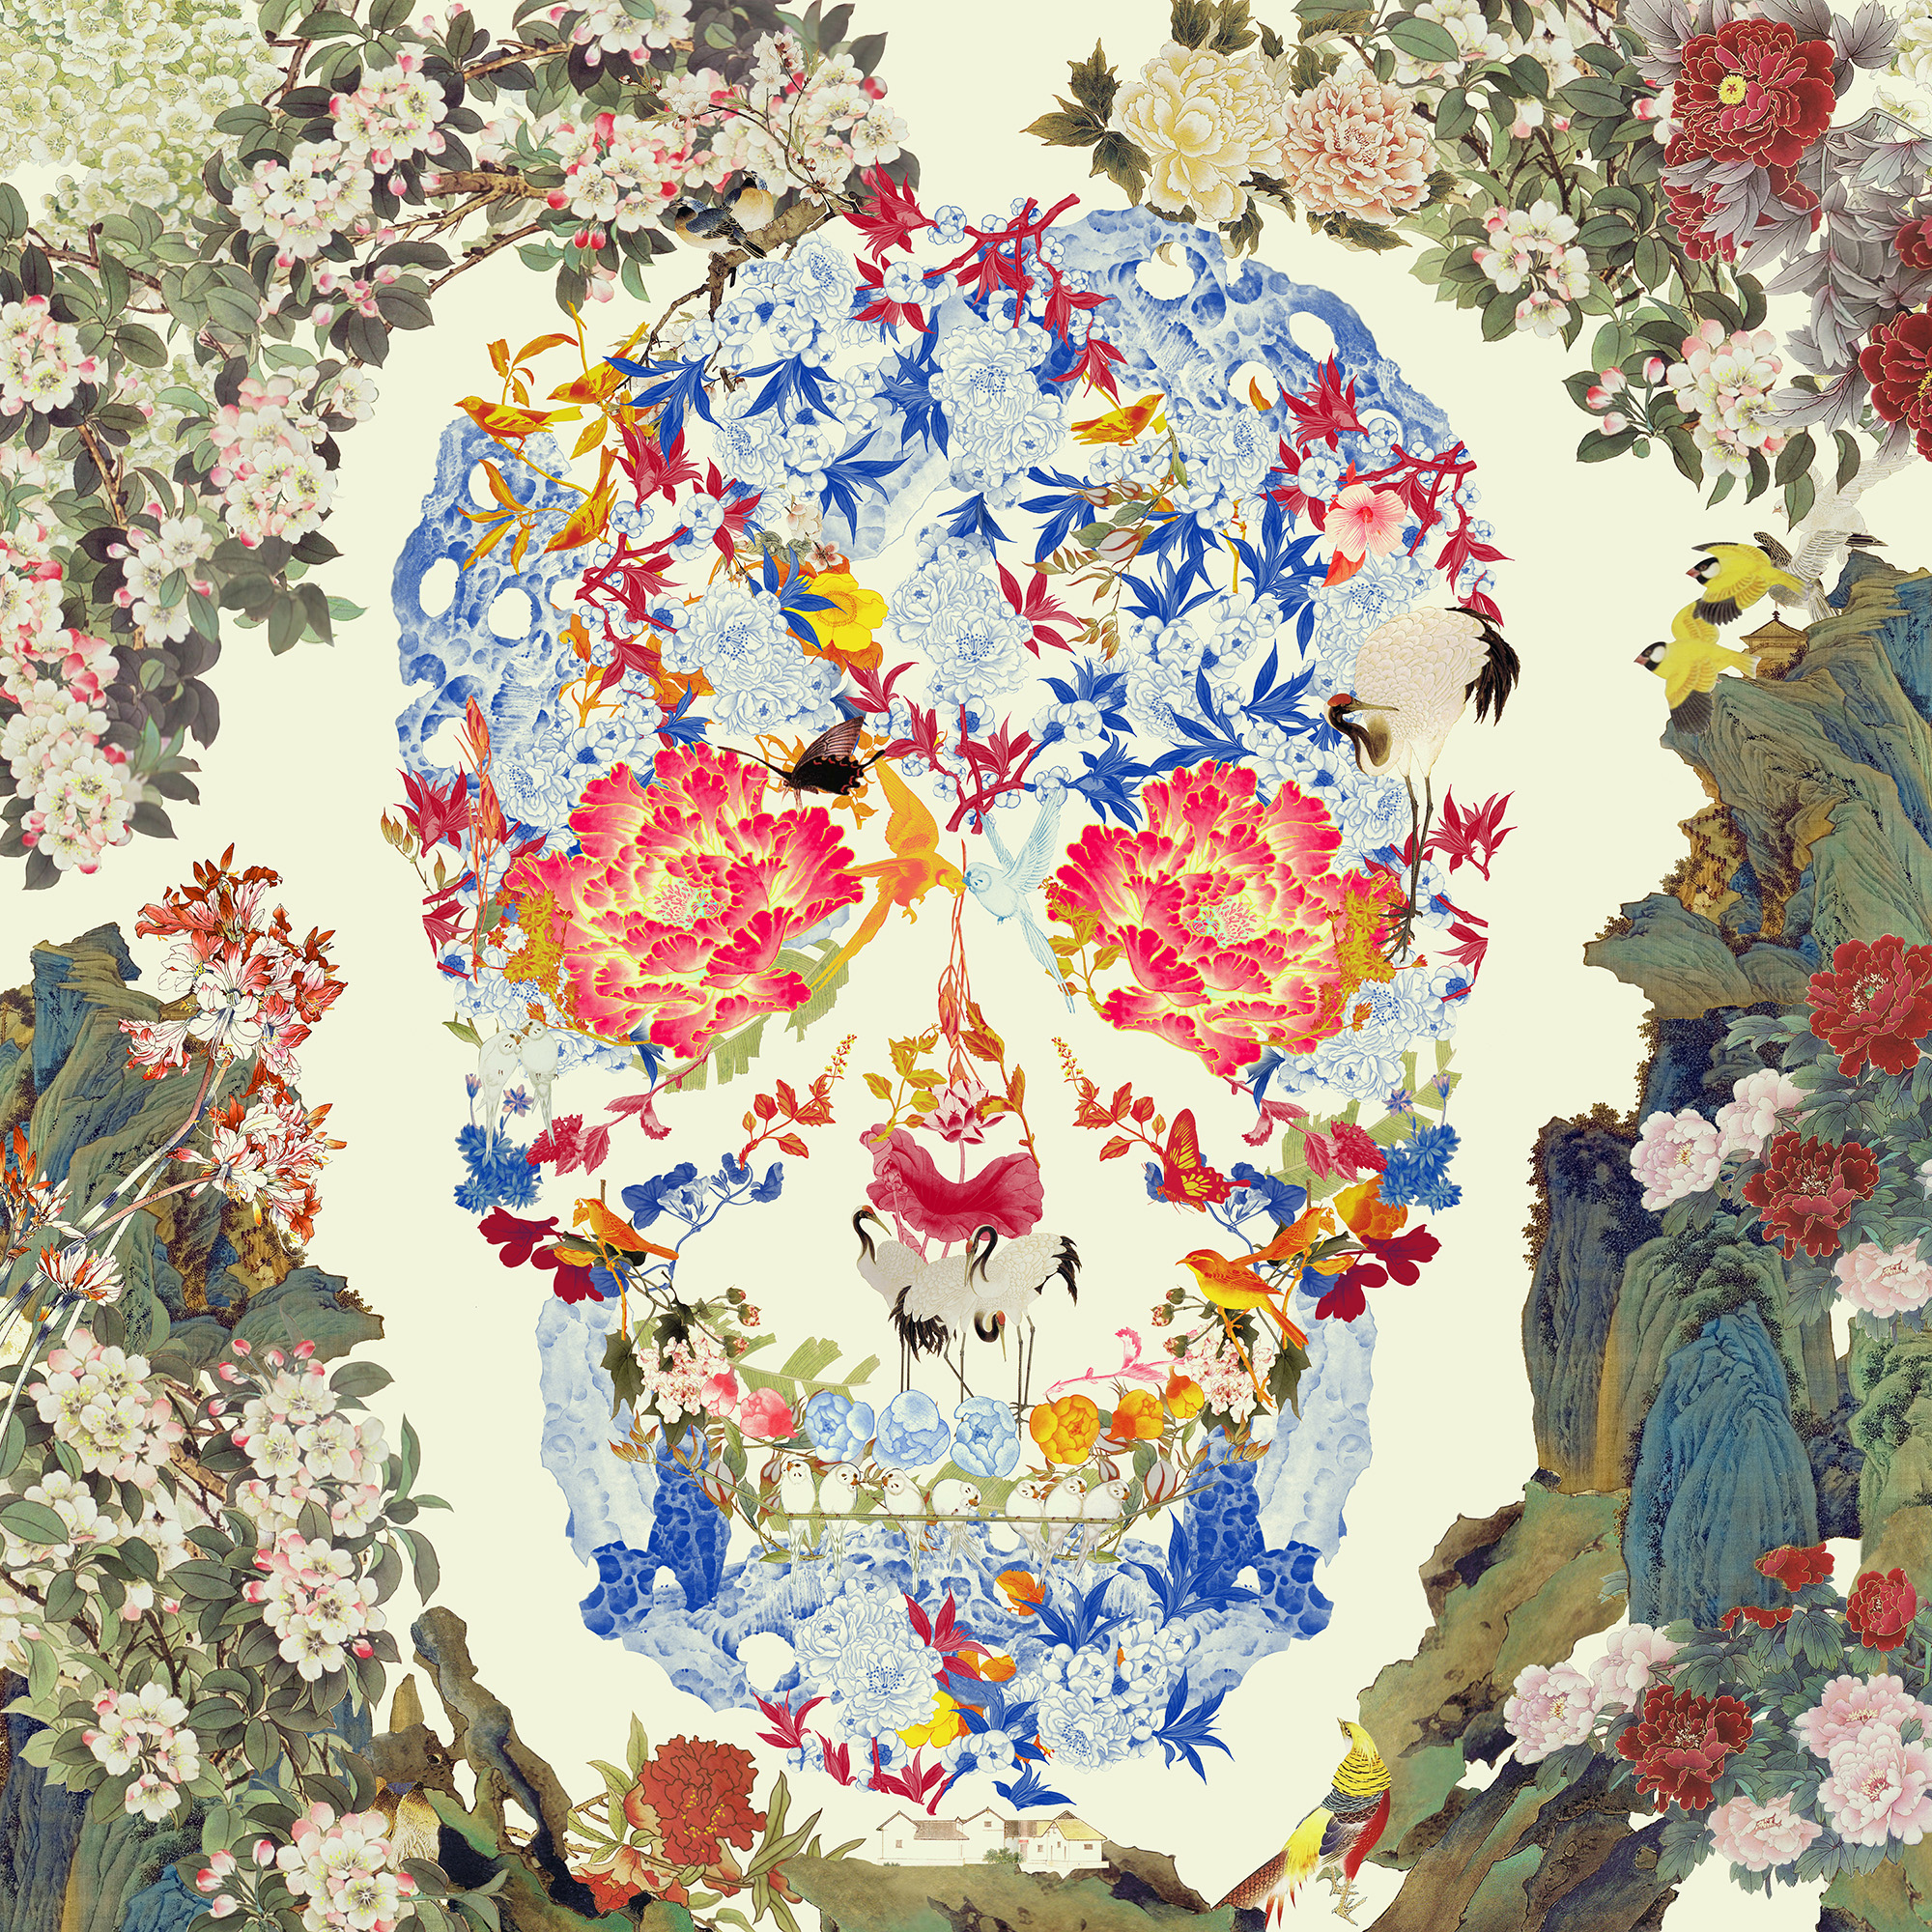 Jacky Tsai ‘Chinese Floral Skull, Yellow Lenticular’ (31.5 x 31.5 inches) FAD magazine 